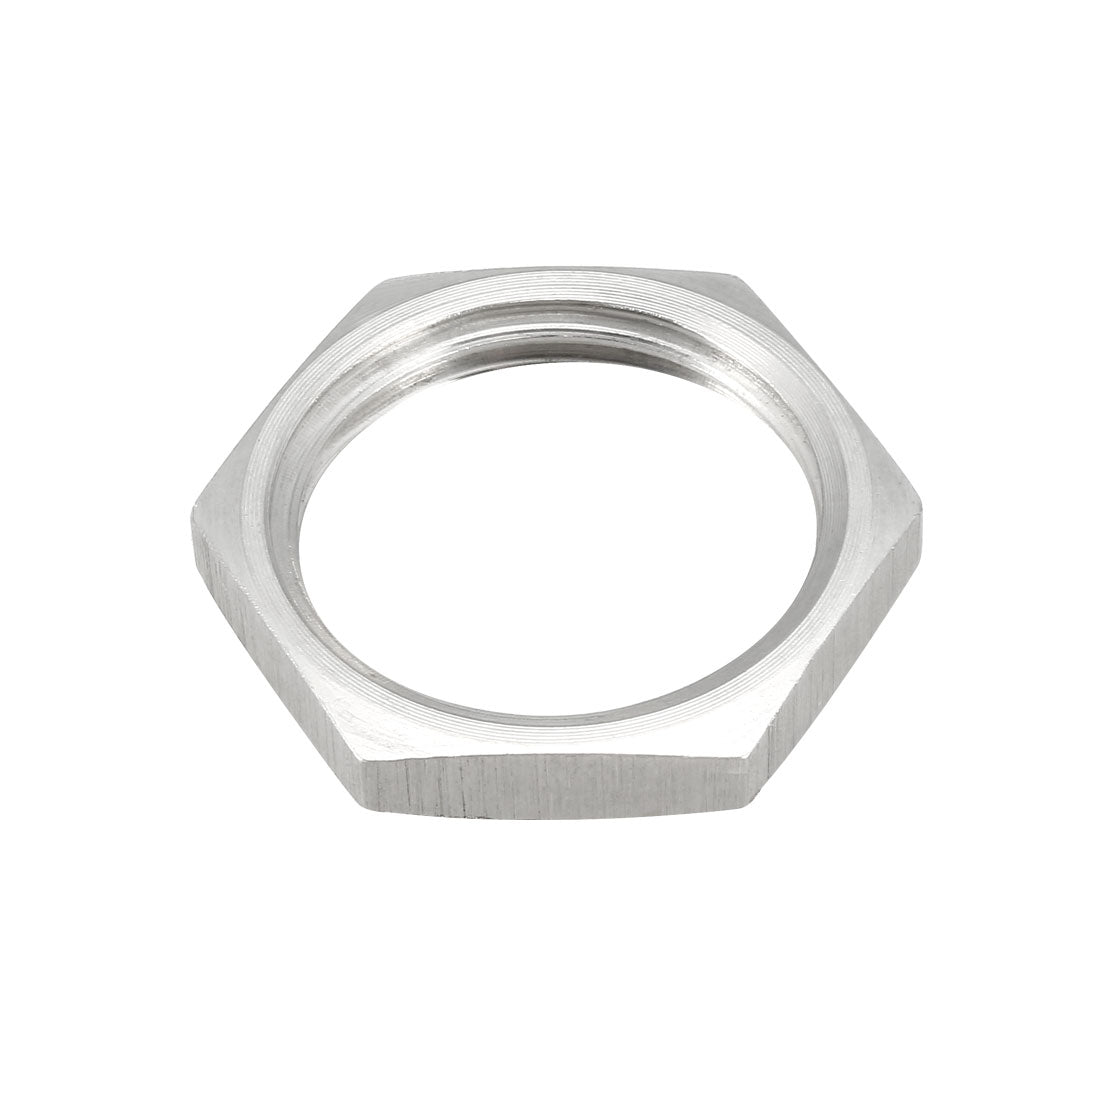 uxcell Uxcell Pipe Fitting Hex Locknut SUS304 Stainless Steel G1/2 Inch Female Threaded